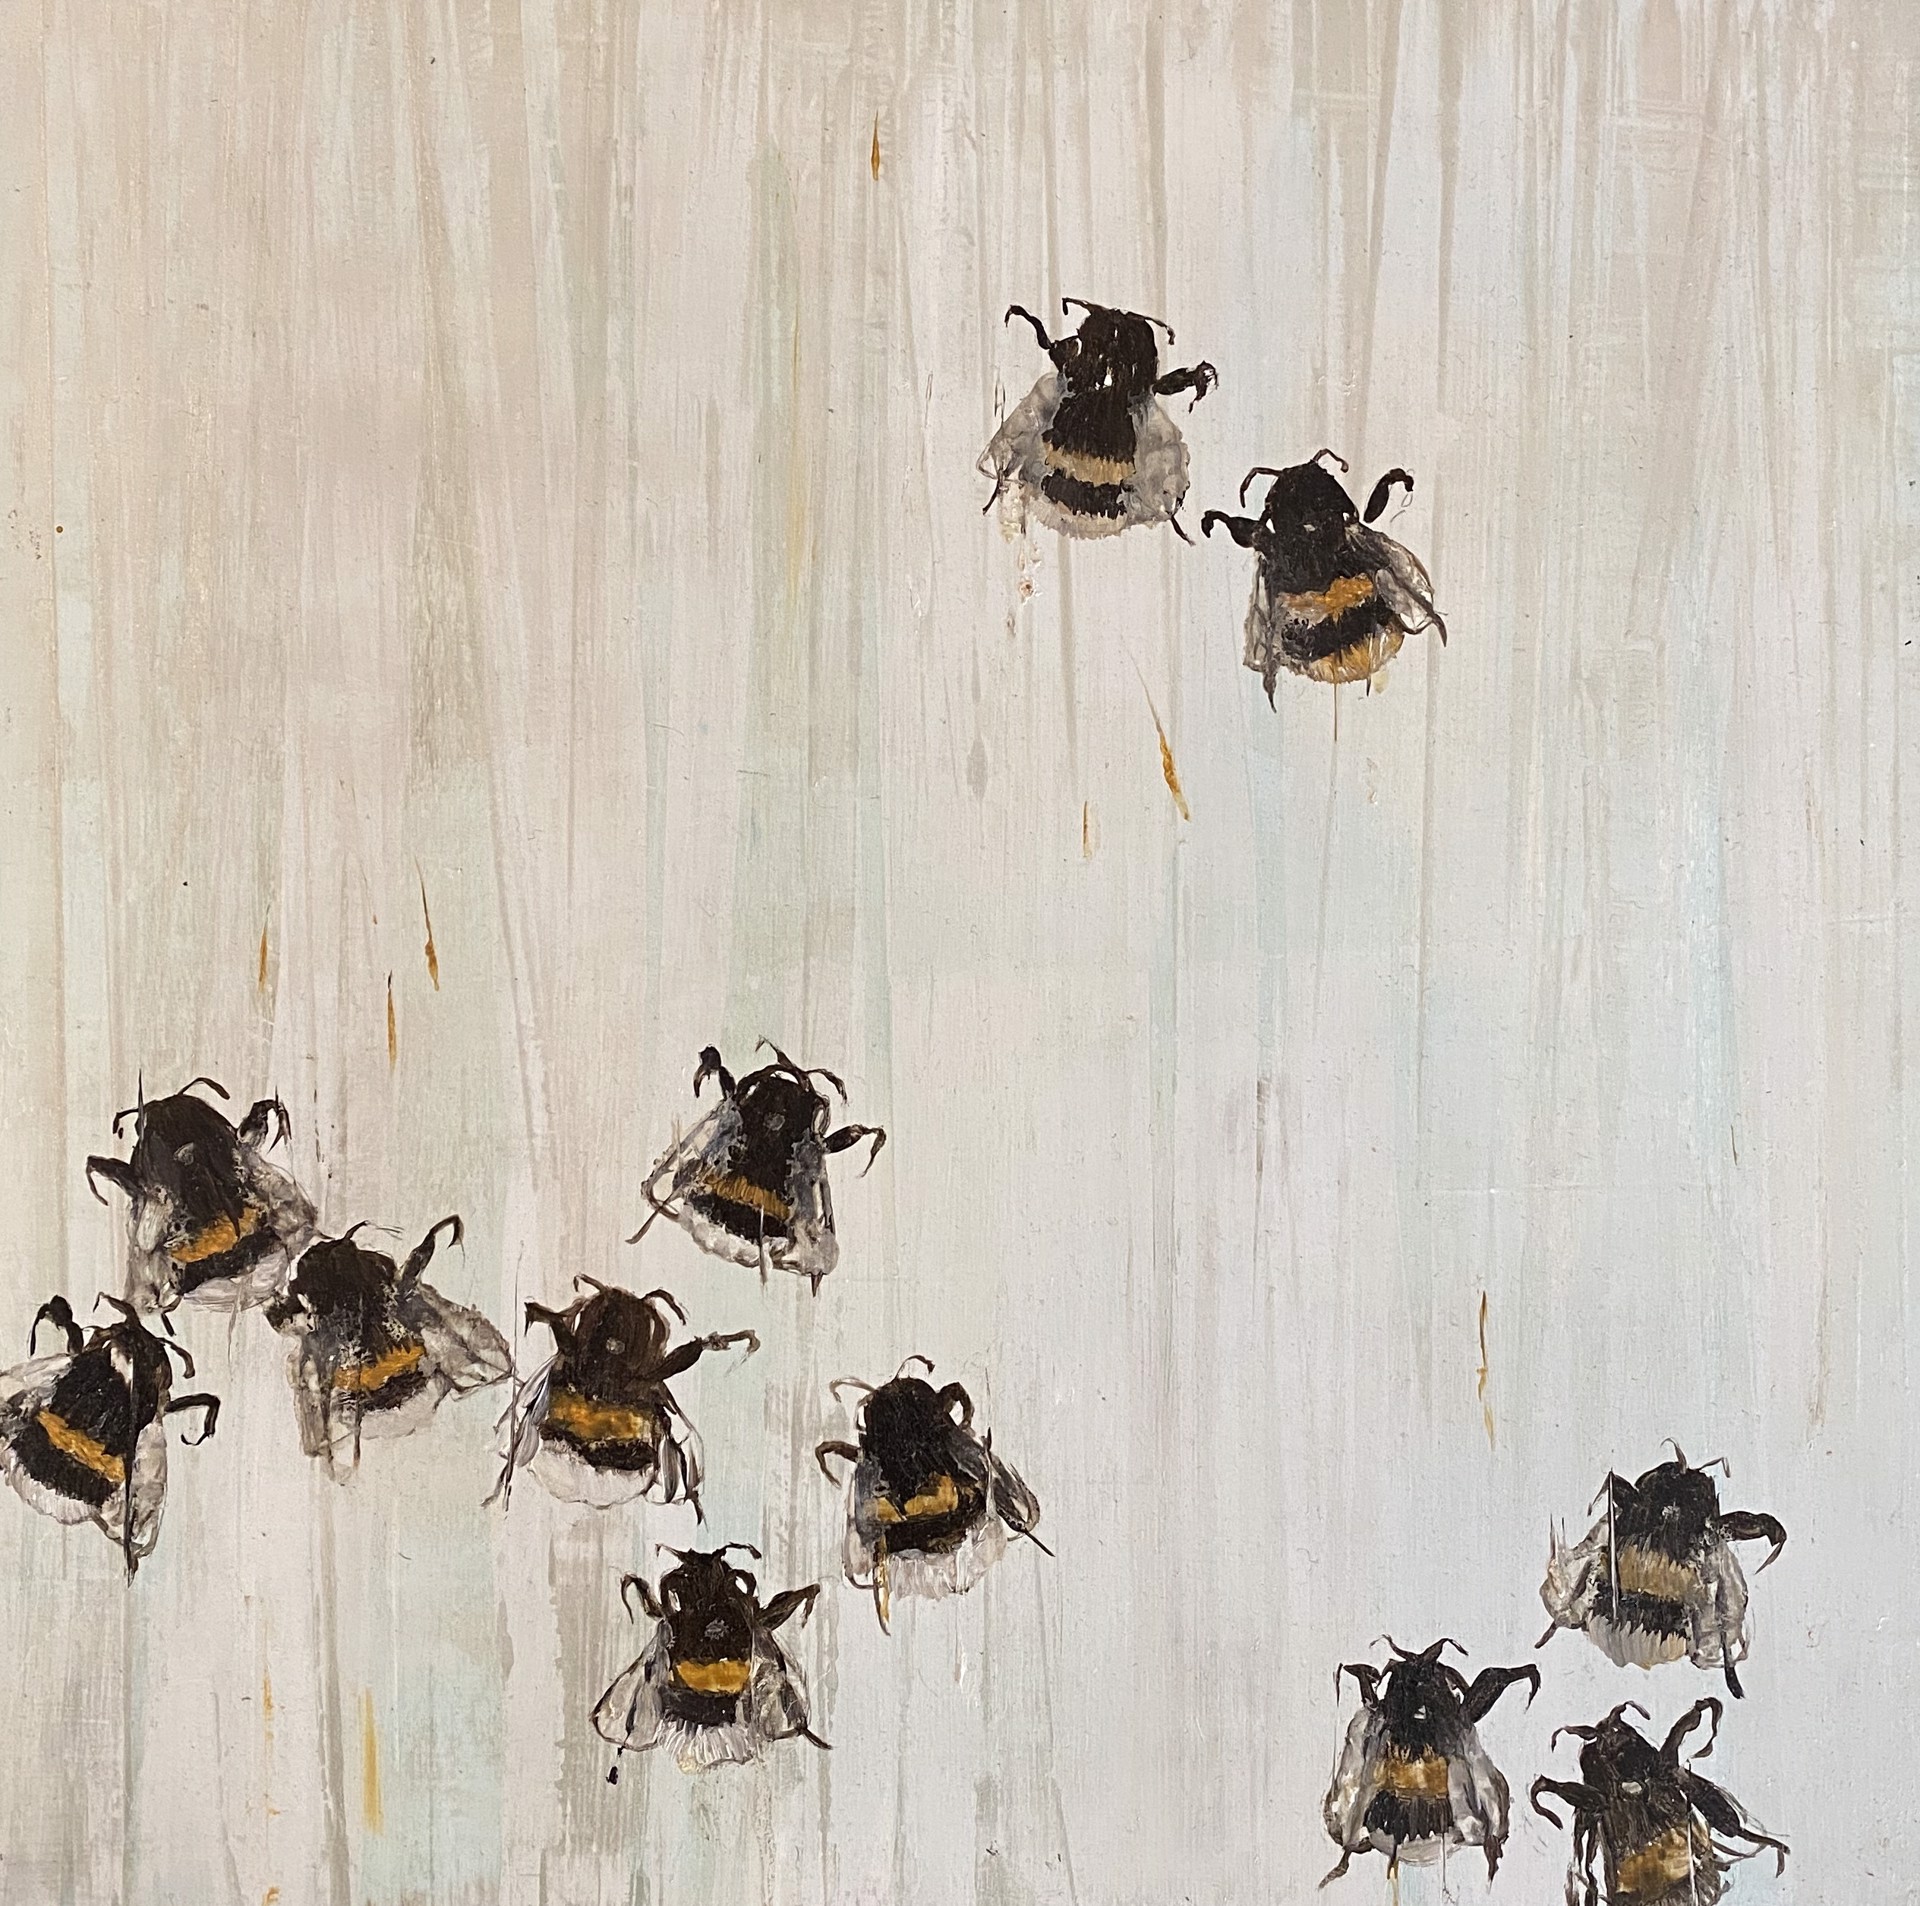 Original Contemporary Oil Painting Of Bees On An Abstract Background Of Silver And Grey, By Jenna Von Benedikt